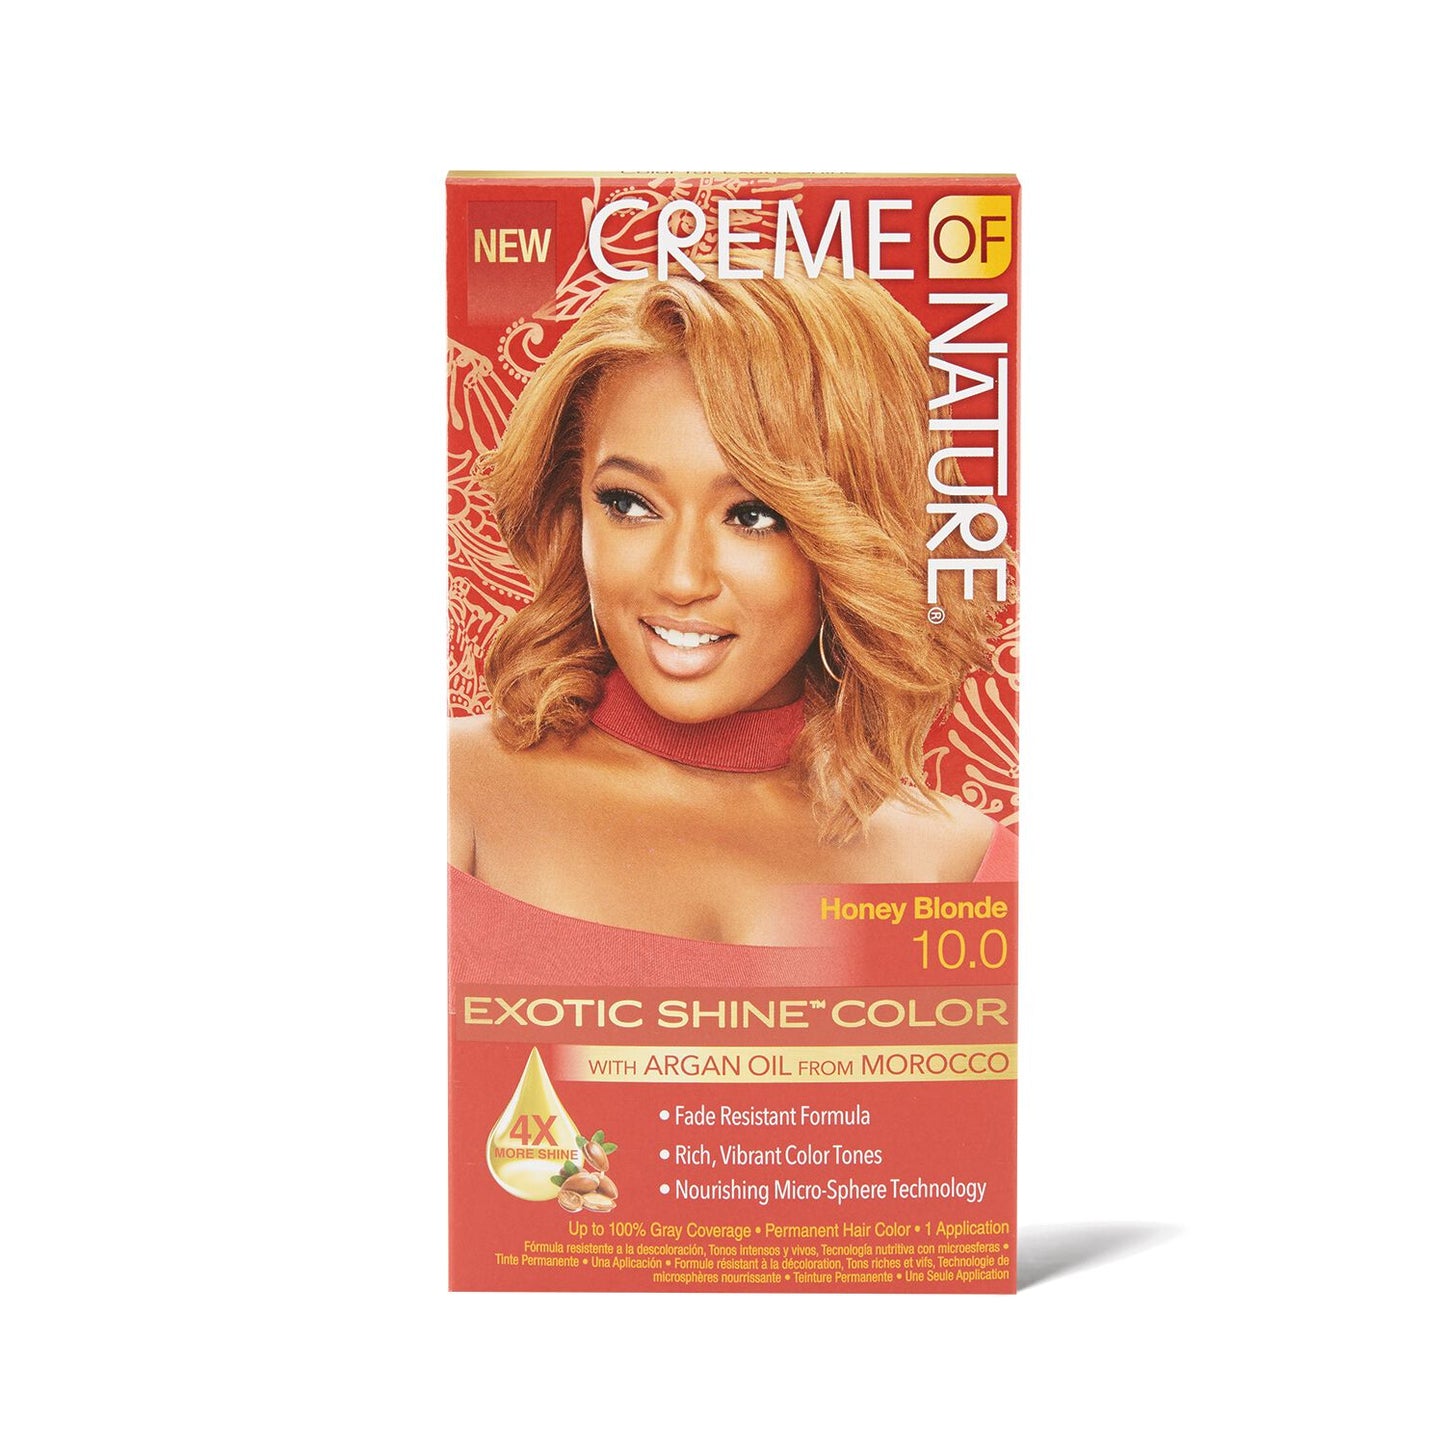 Creme of Nature Exotic Shine Honey Blonde Permanent Hair Color